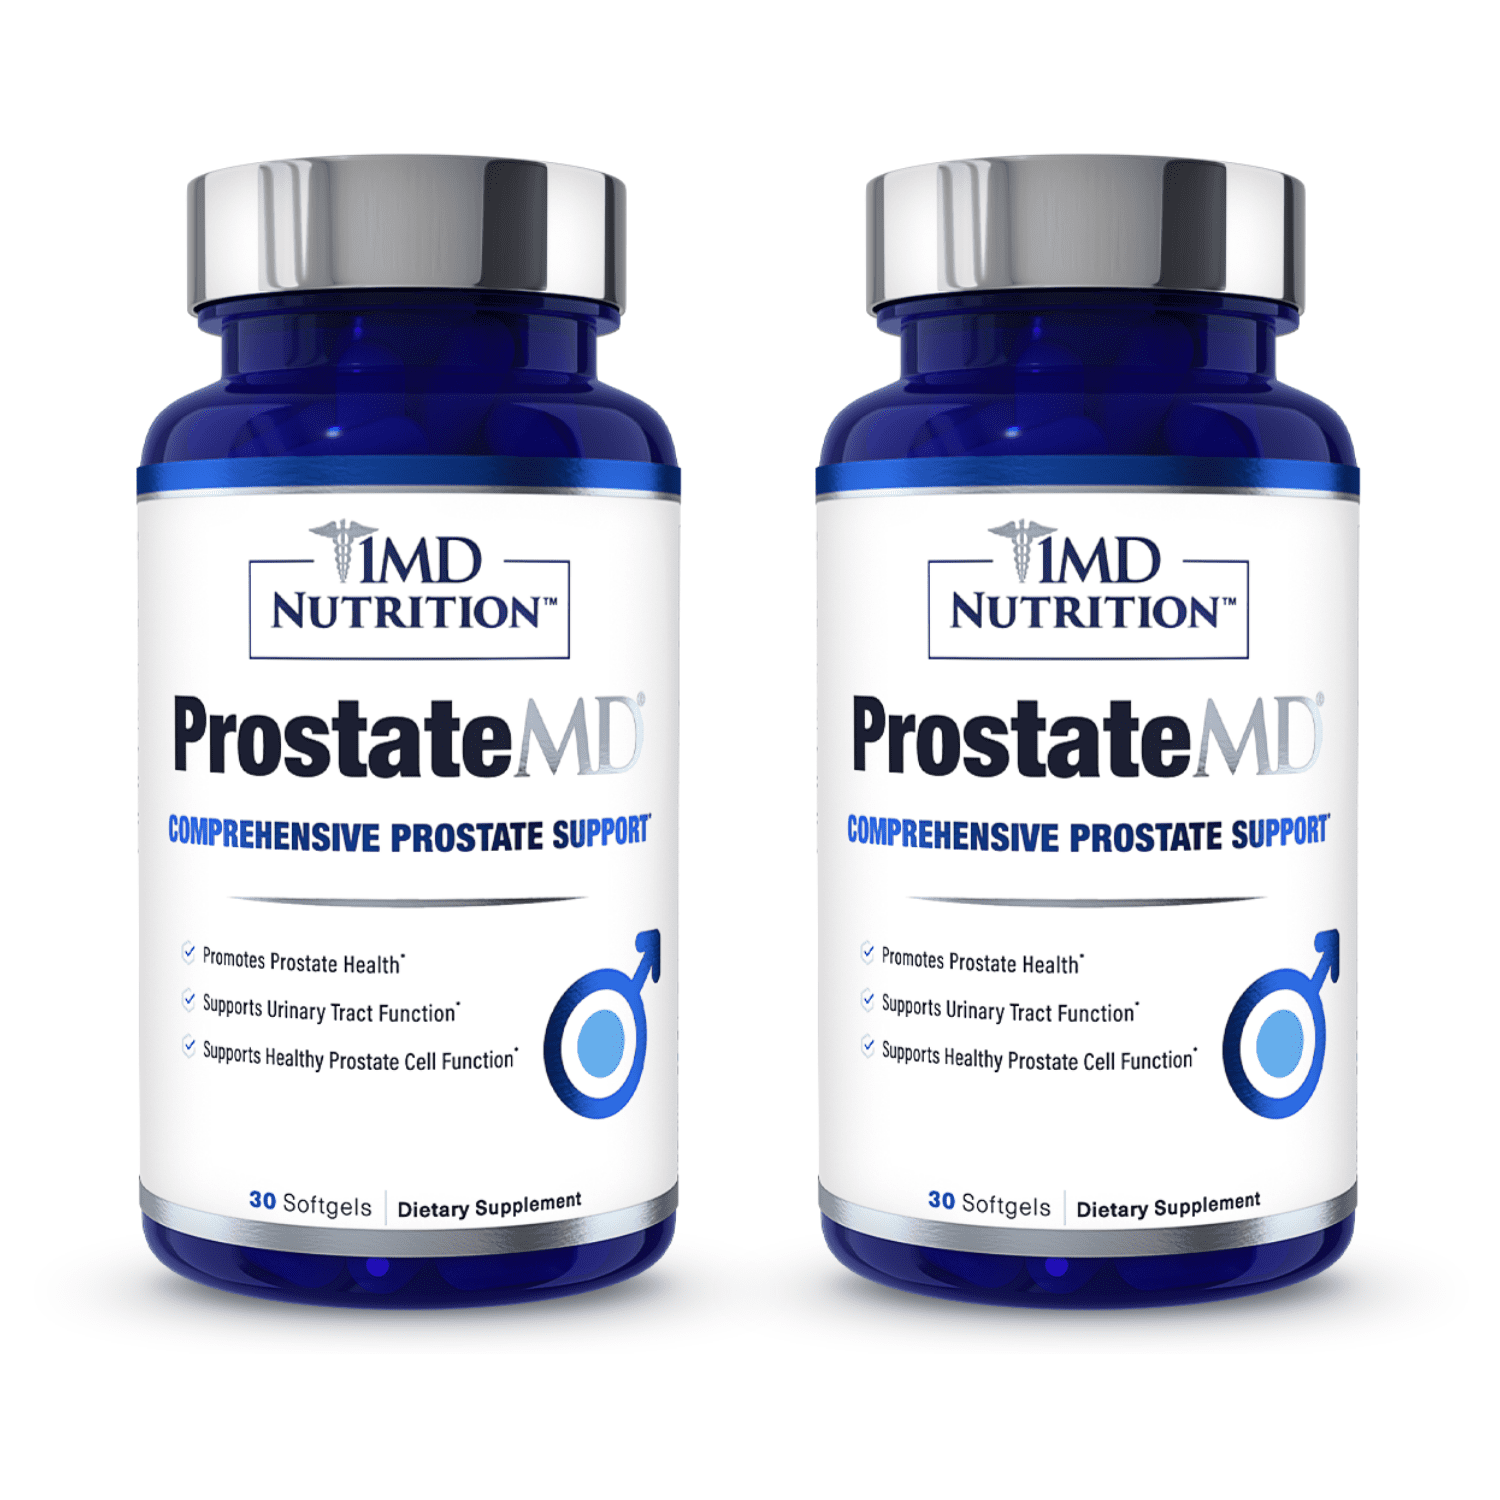 1md Nutrition Prostatemd Saw Palmetto Prostate Support Supplement Support For Urinary Tract